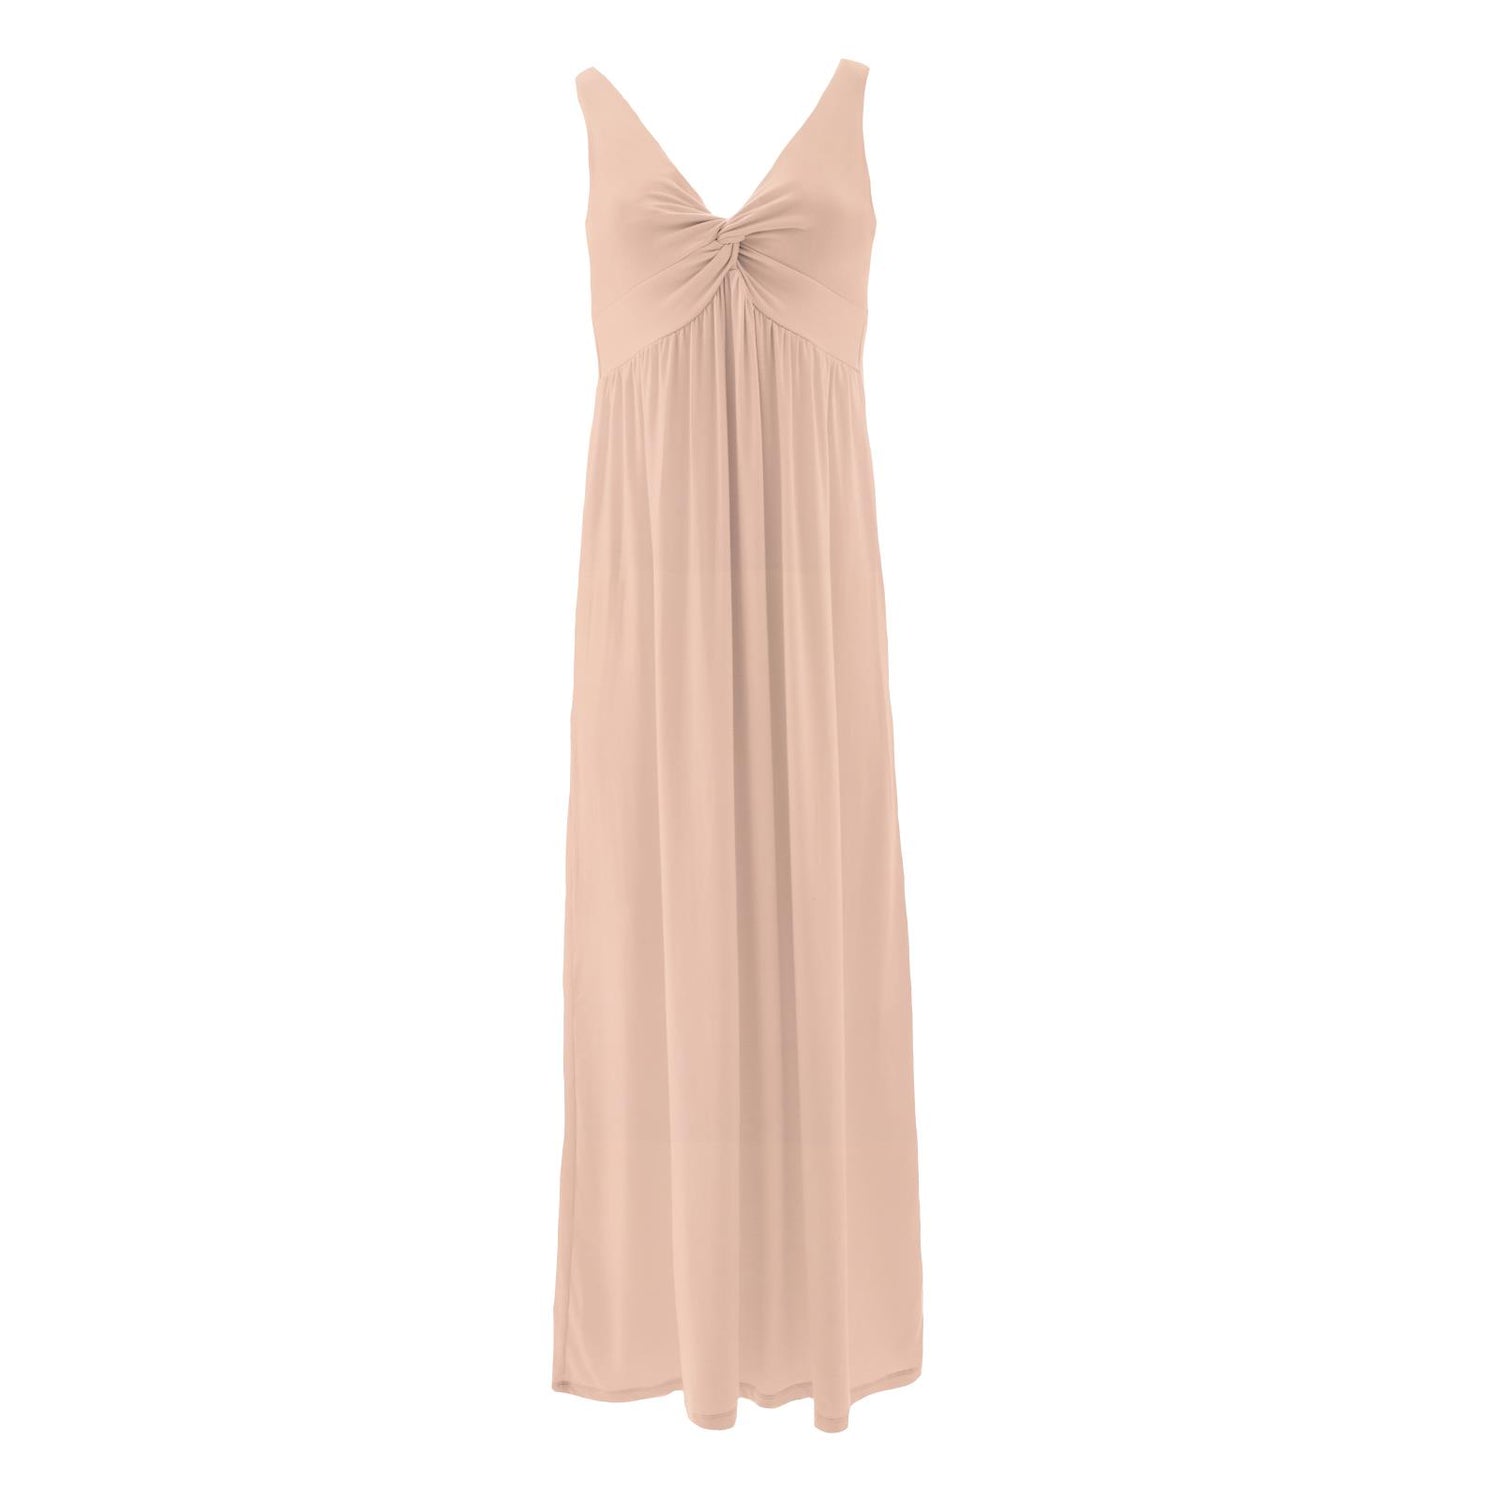 Women's Solid Simple Twist Nightgown in Peach Blossom